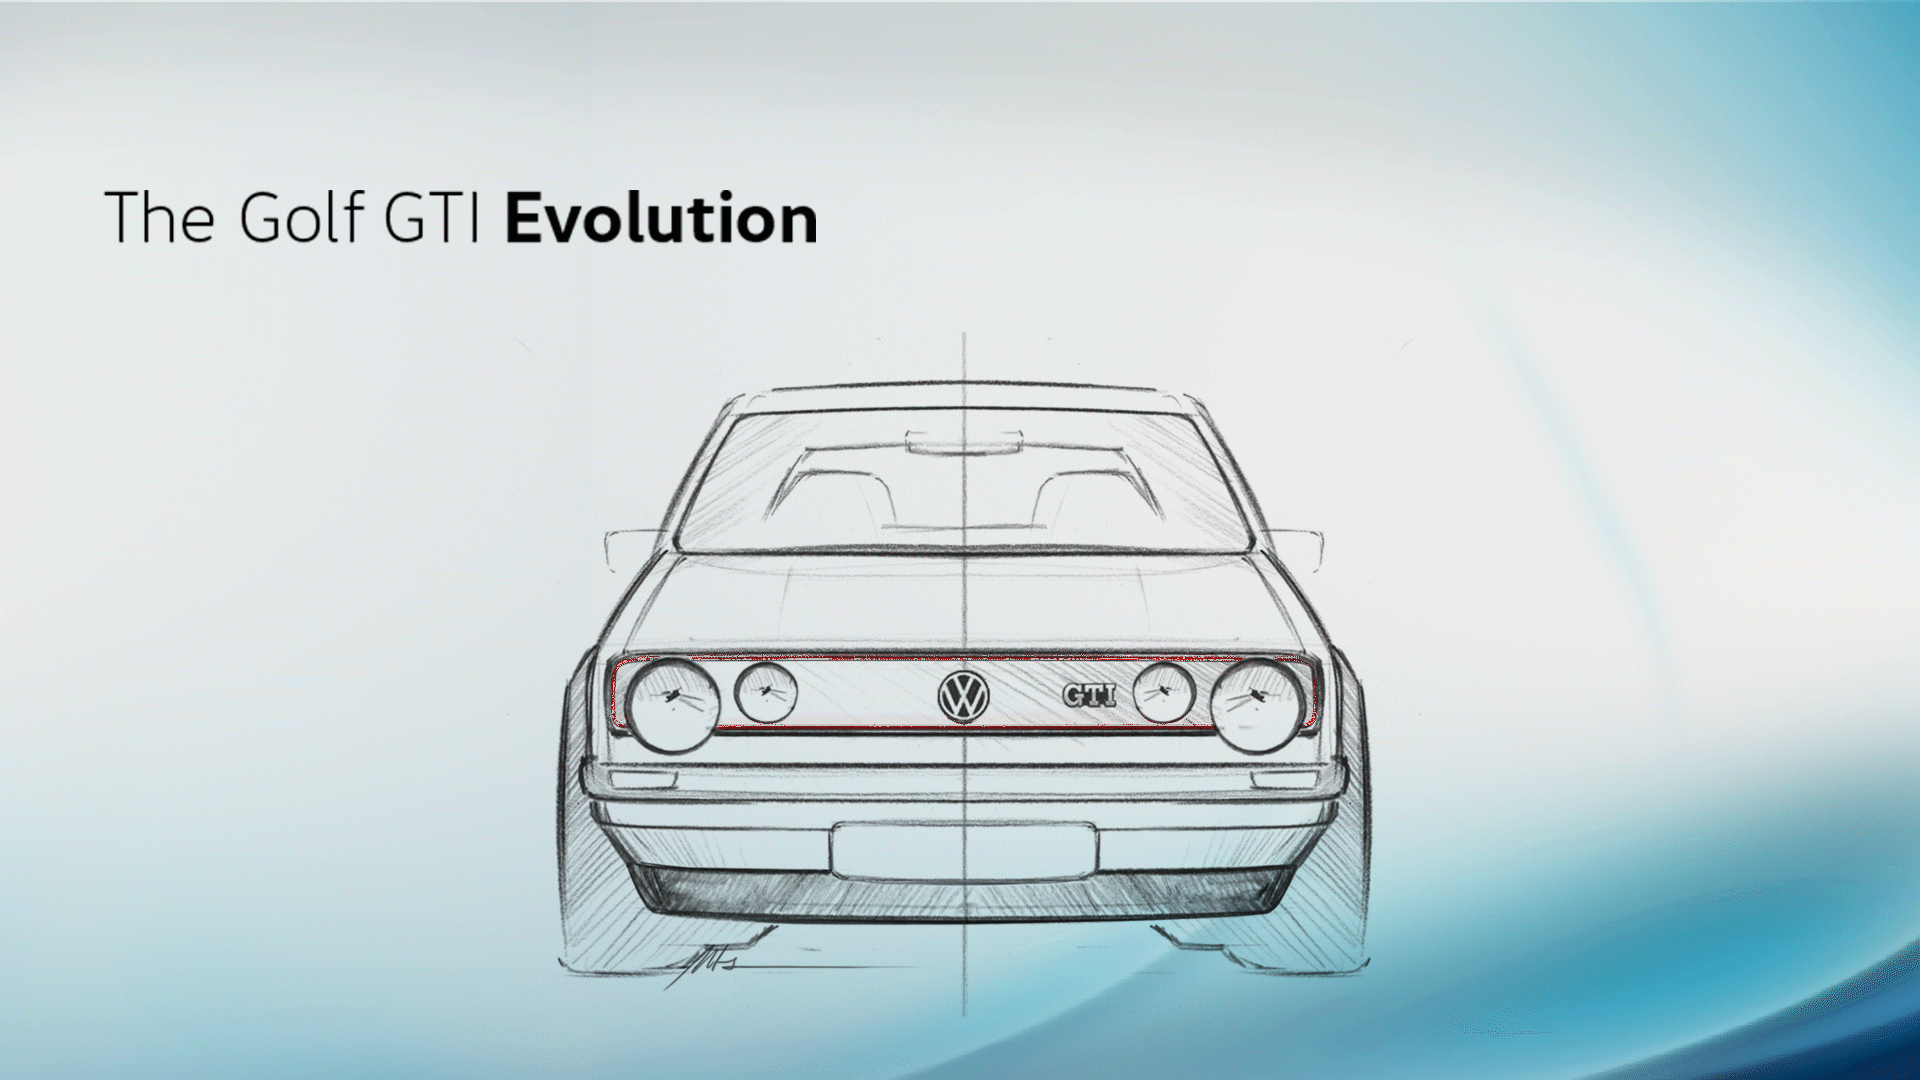 Story: “Golf GTI – eight generations, each with that distinctive front.”